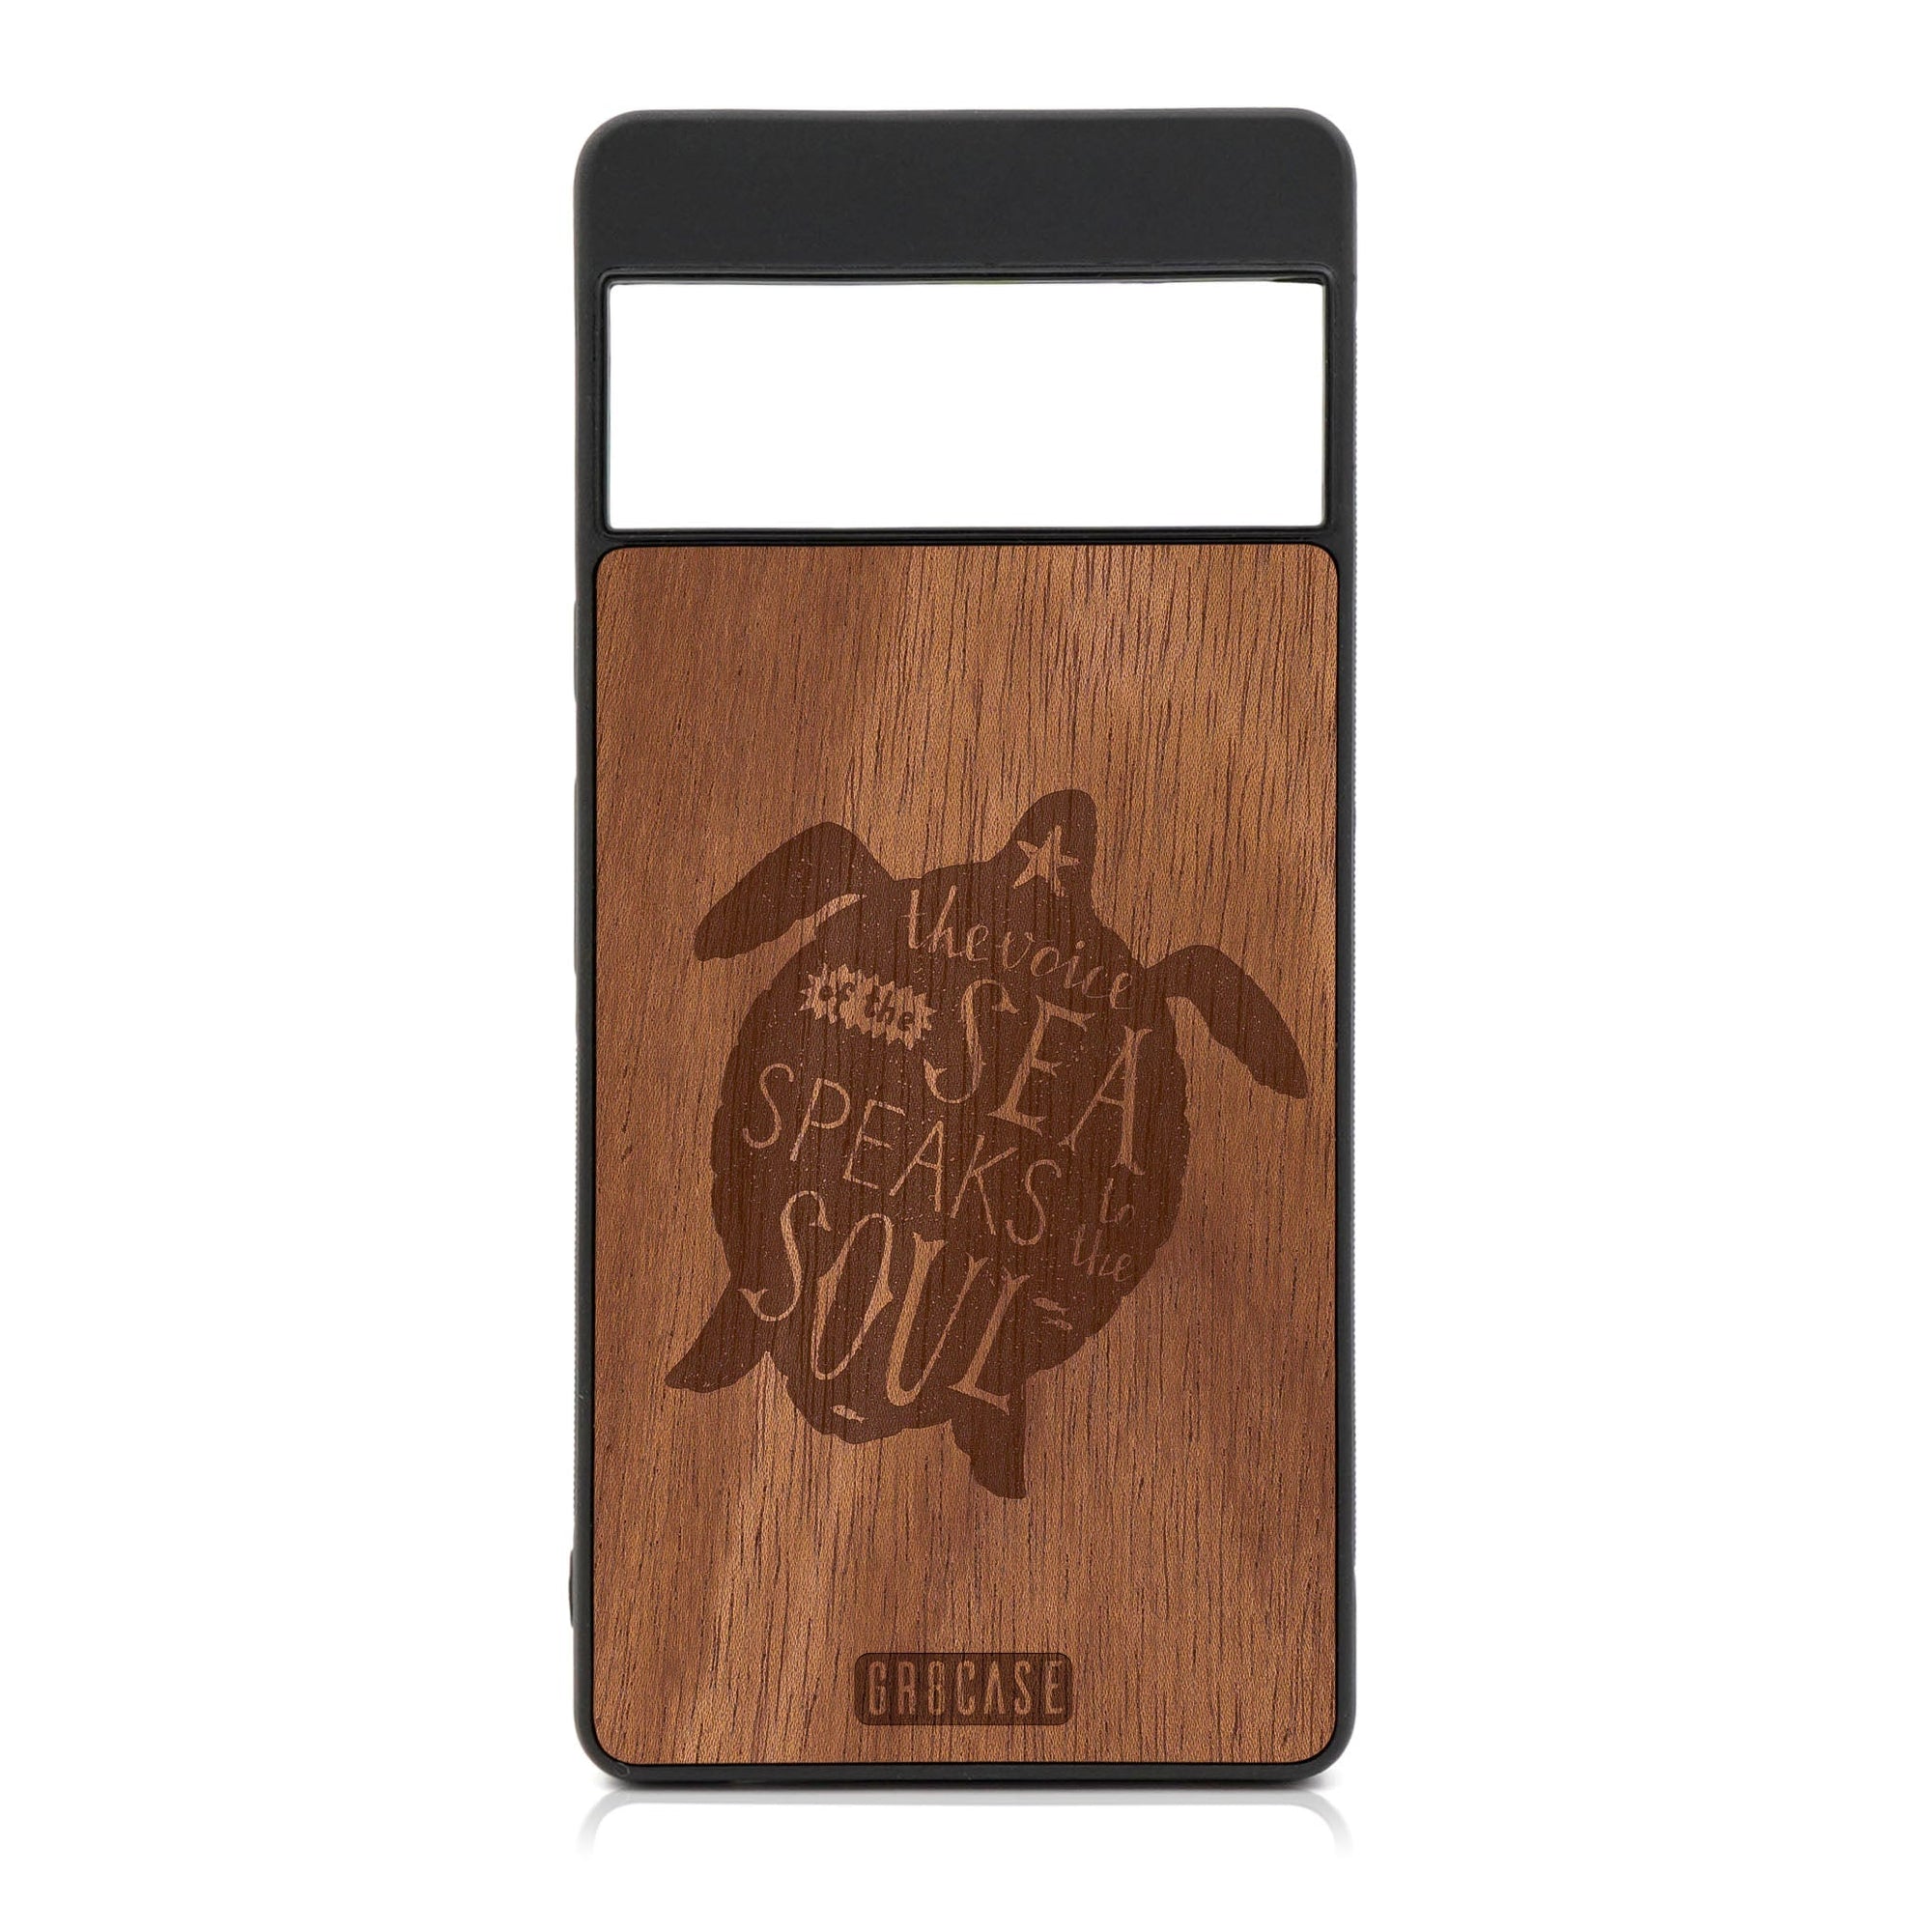 The Voice Of The Sea Speaks To The Soul (Turtle) Design Wood Case For Google Pixel 6A